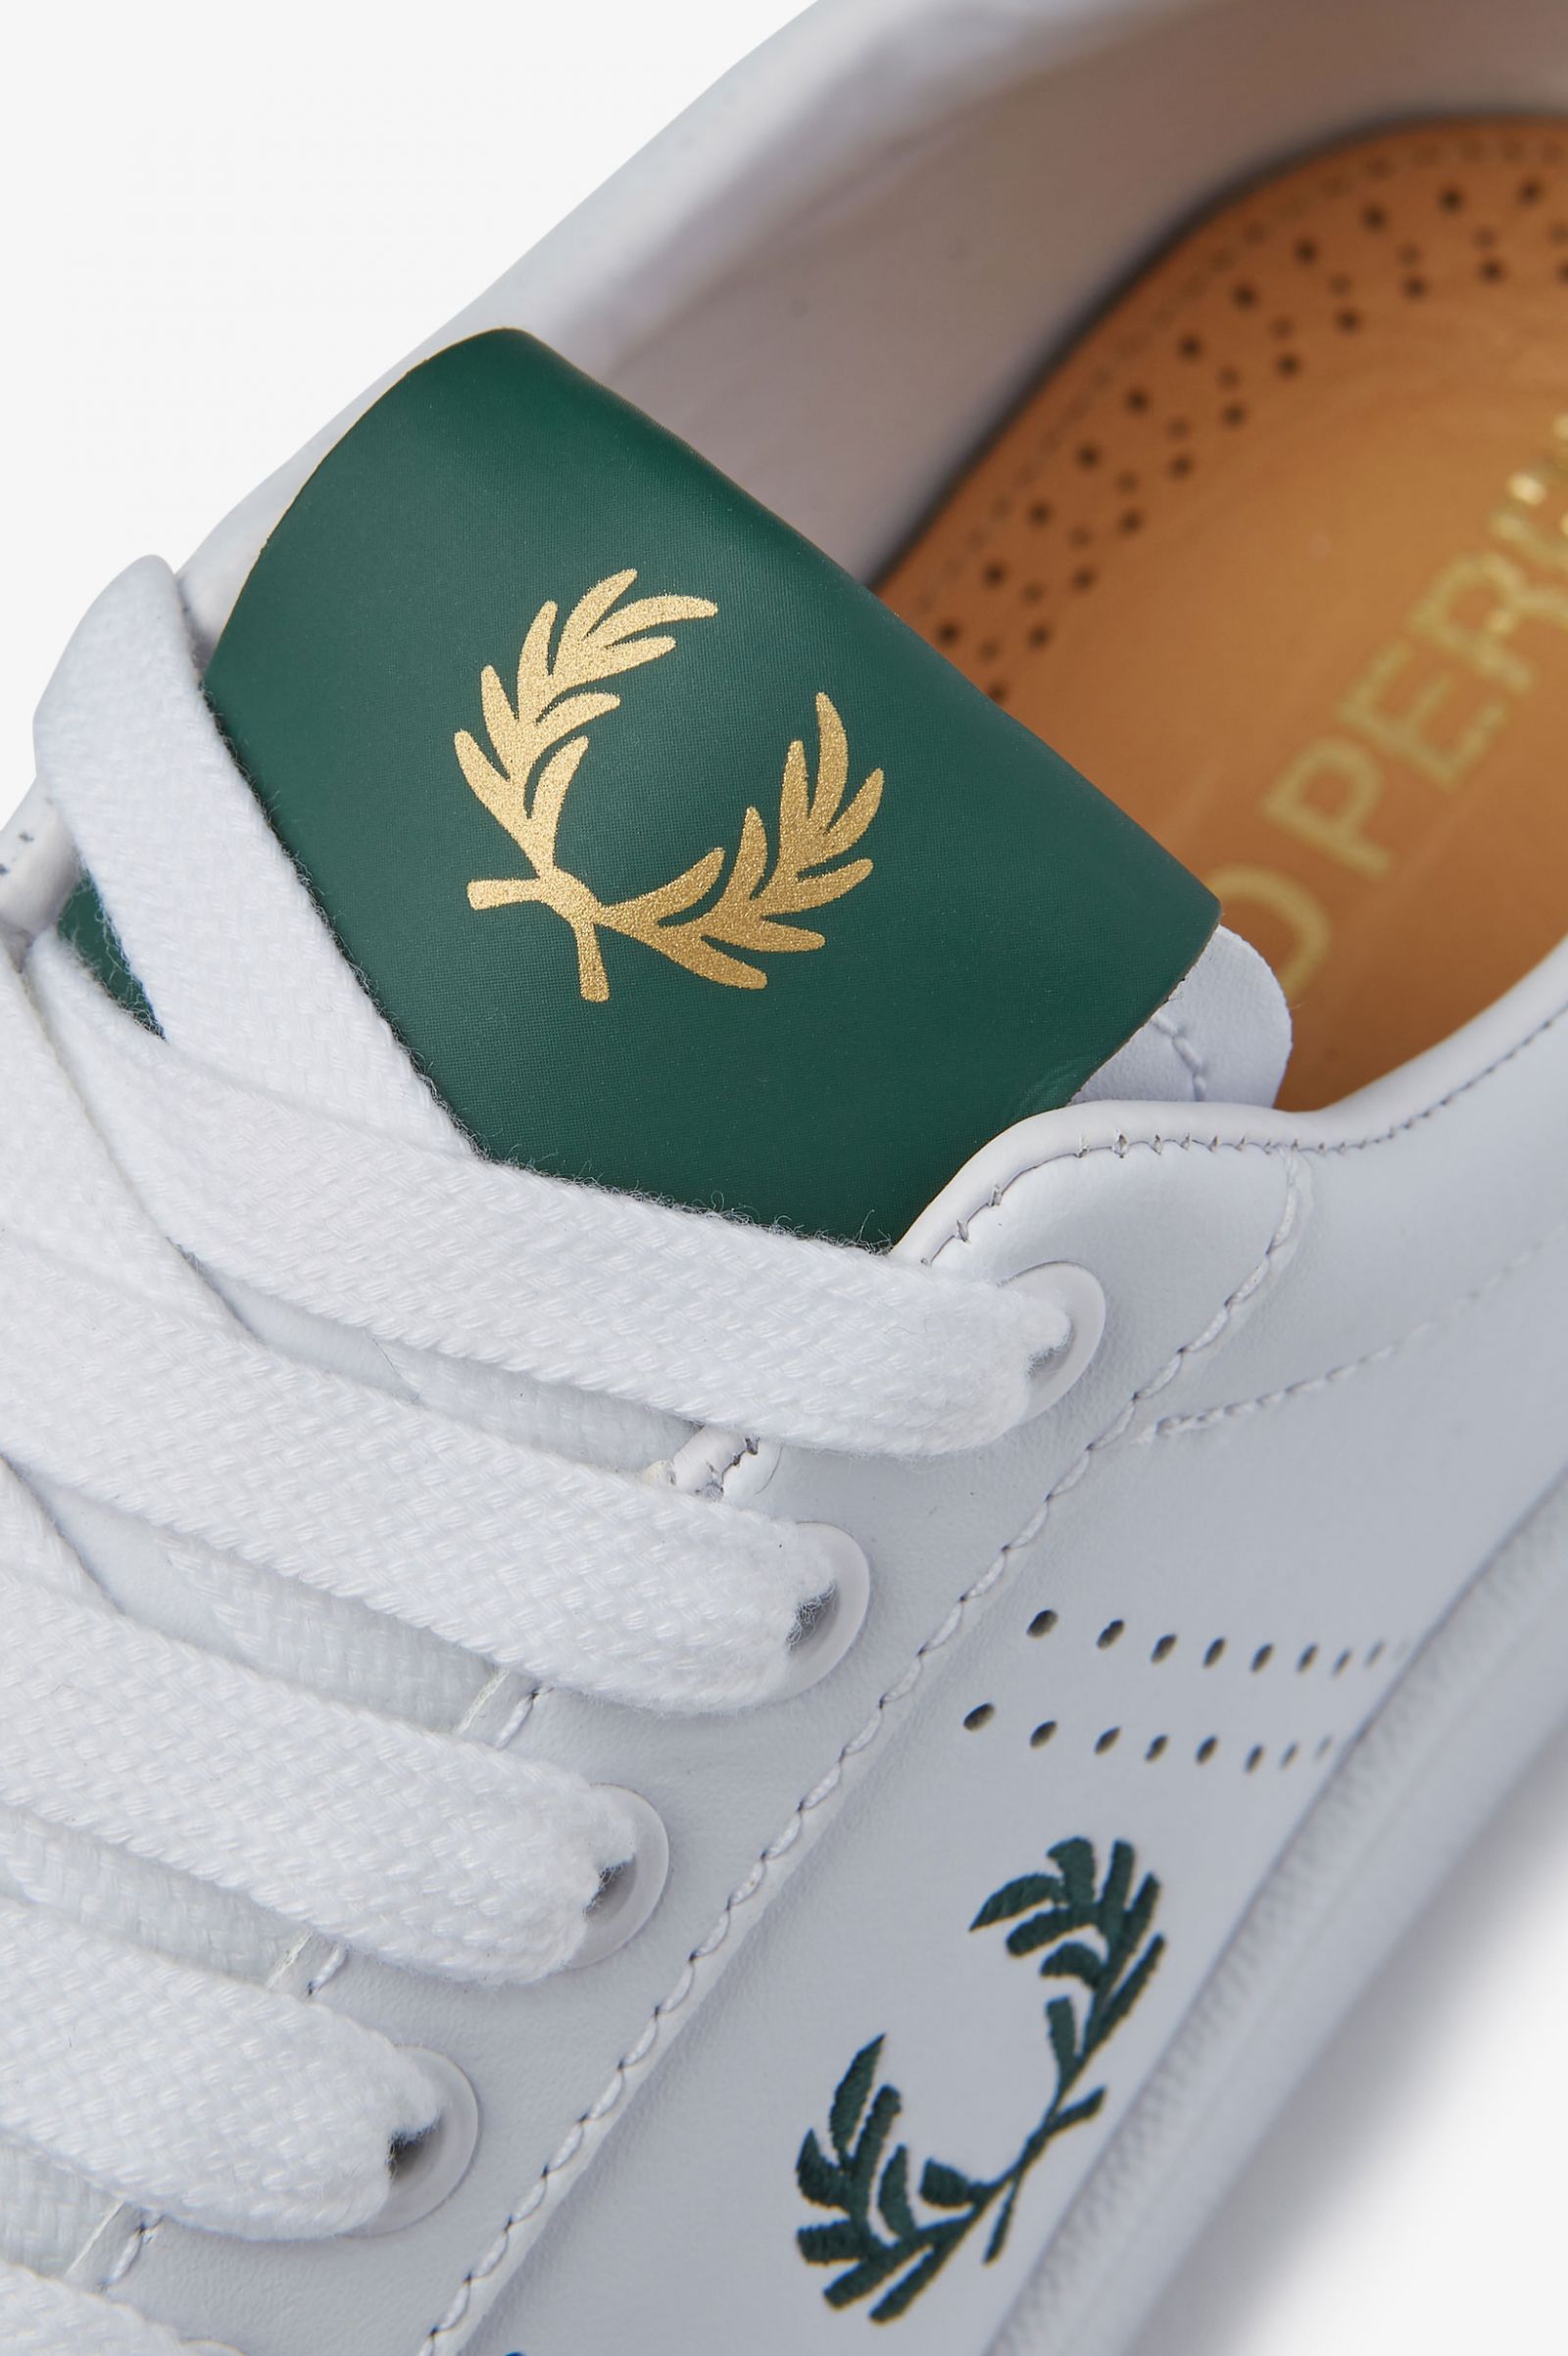 fred perry b721 canvas trainer with stripe logo crest